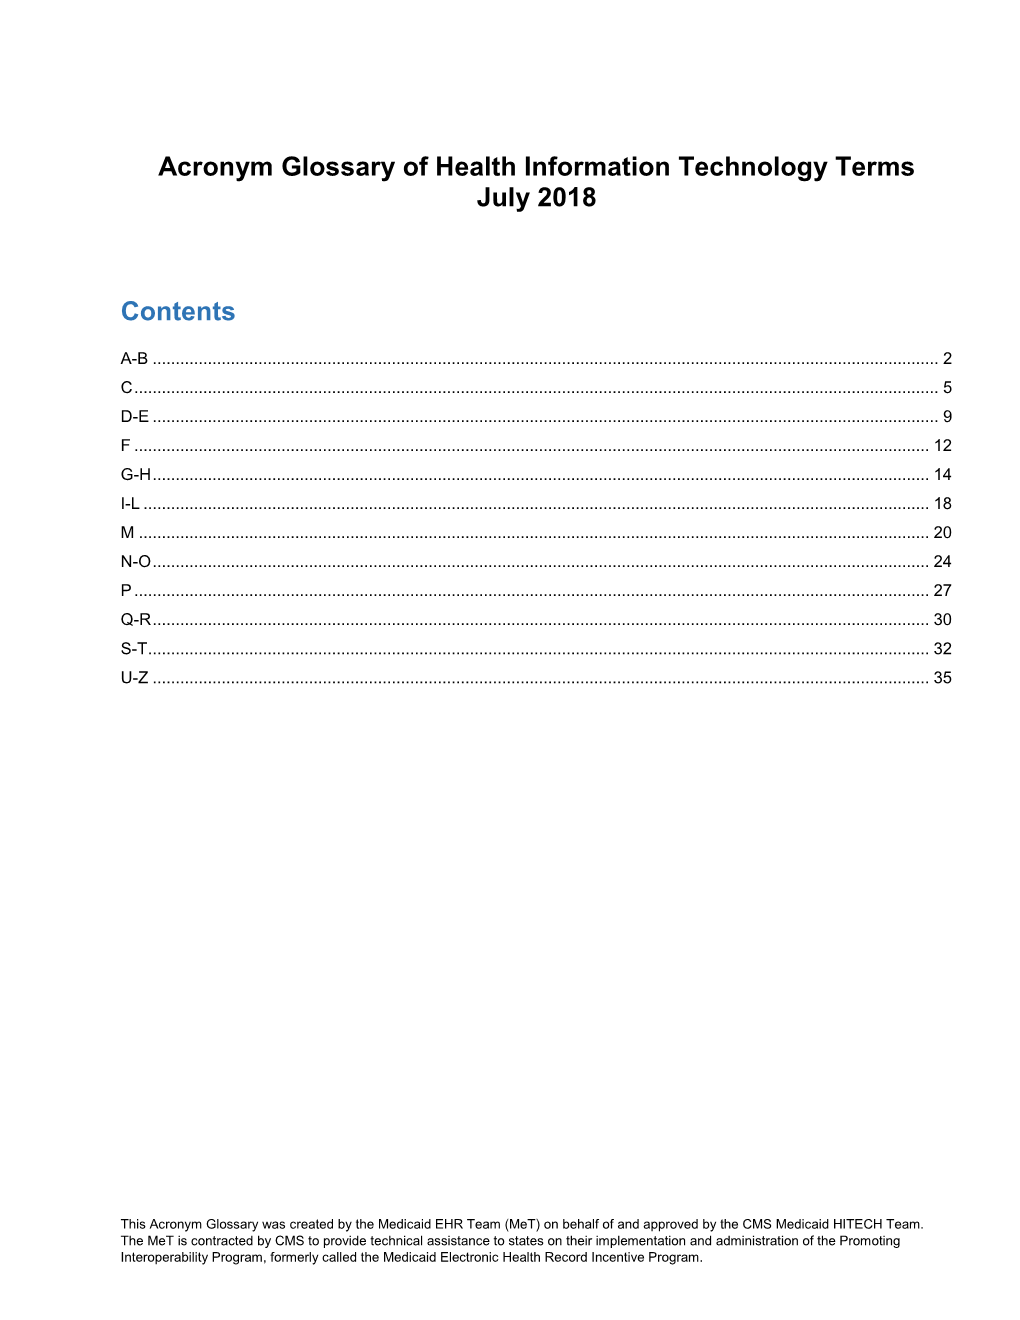 Acronym Glossary of Health Information Technology Terms July 2018